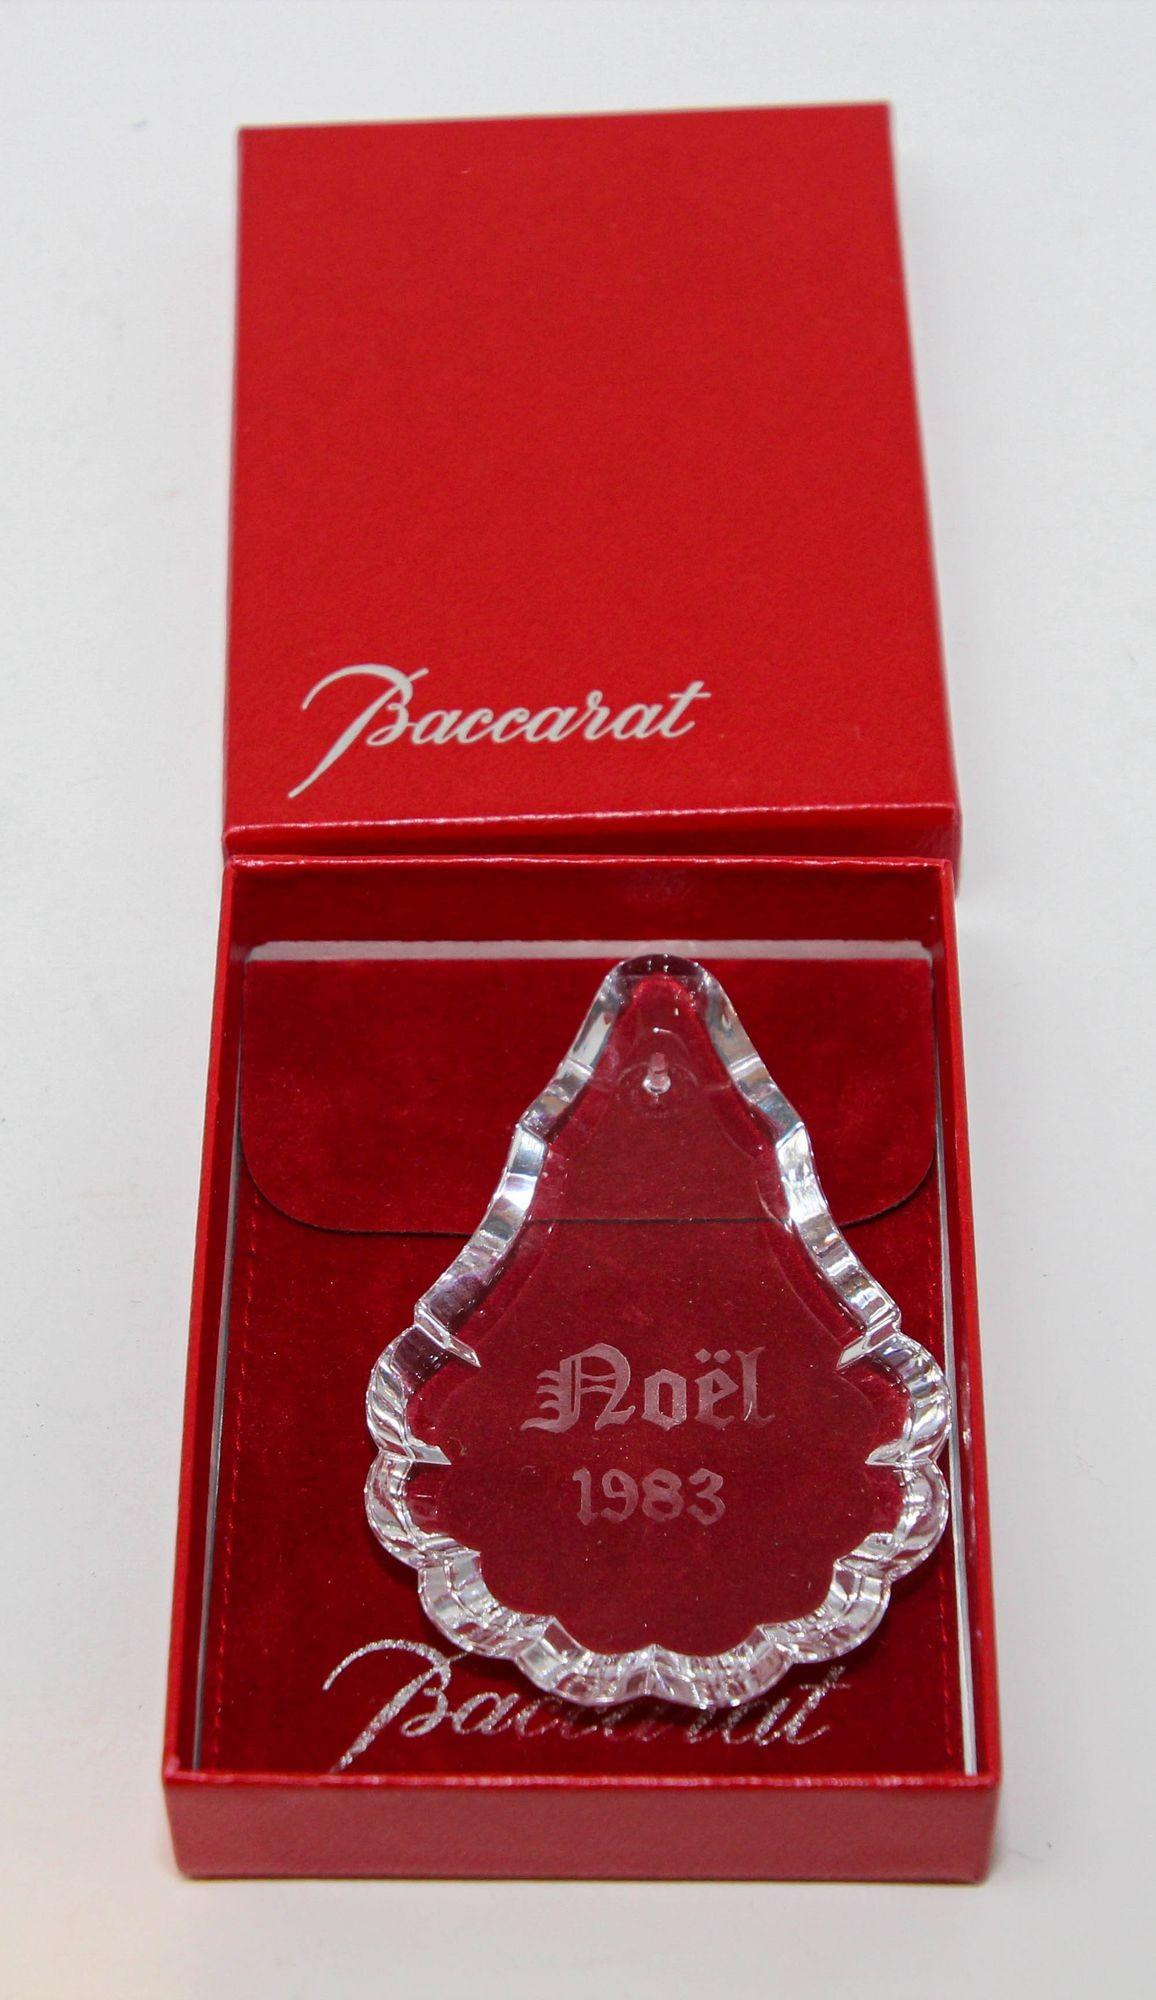 Baccarat Crystal 1983 Annual Christmas Ornament.
This is the first year that Baccarat released an annual ornament and is extremely rare.
Highly collectible from year 1983, Made in France.
Hand made in France. Comes with traditional red Baccarat